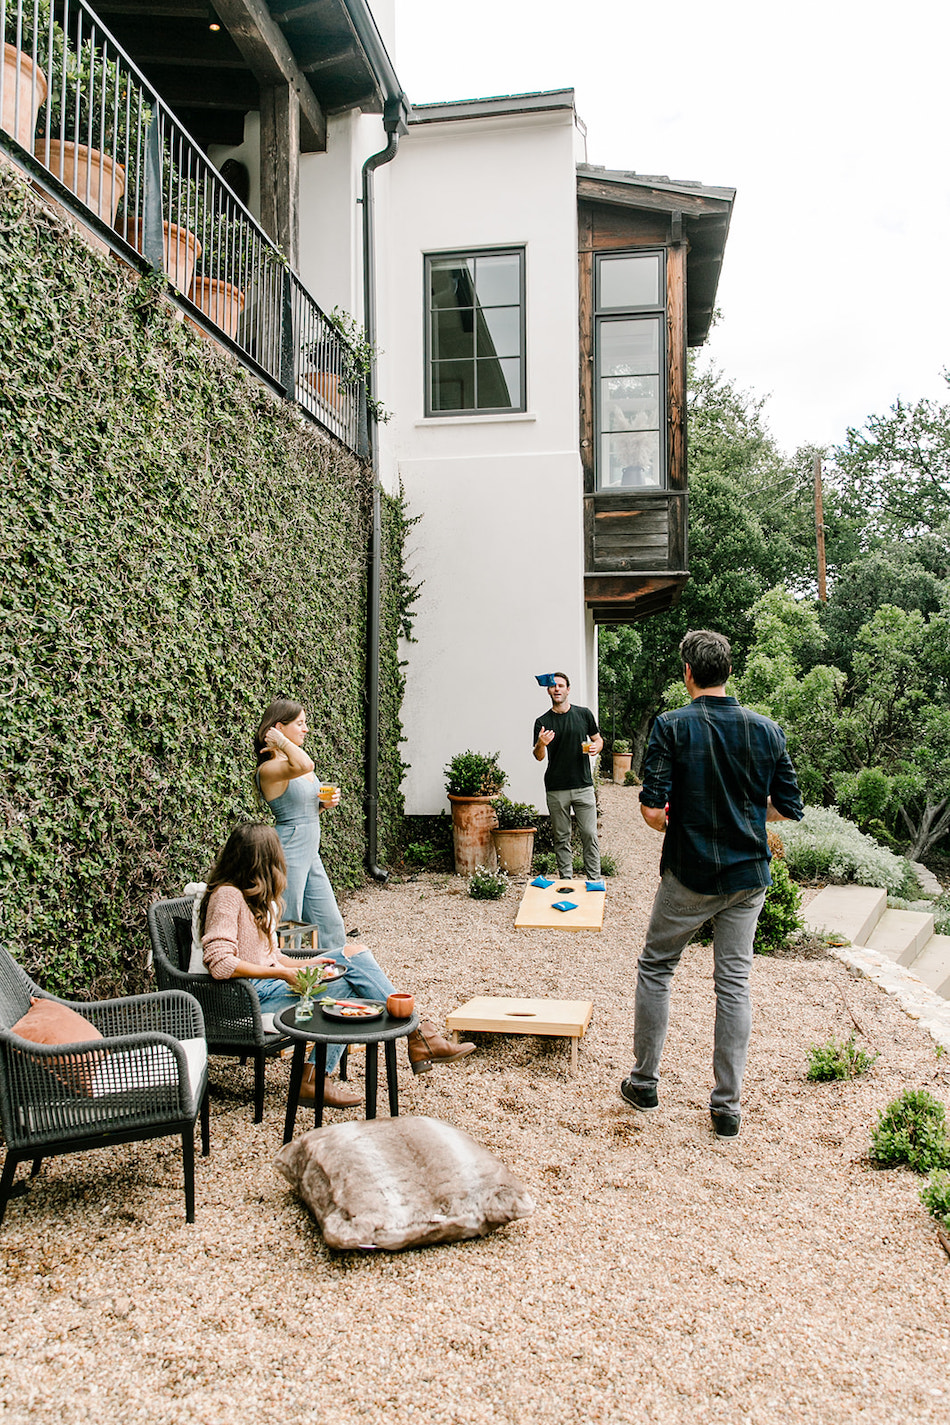 yard games, beanbag toss, friends hanging out - backyard game night with target